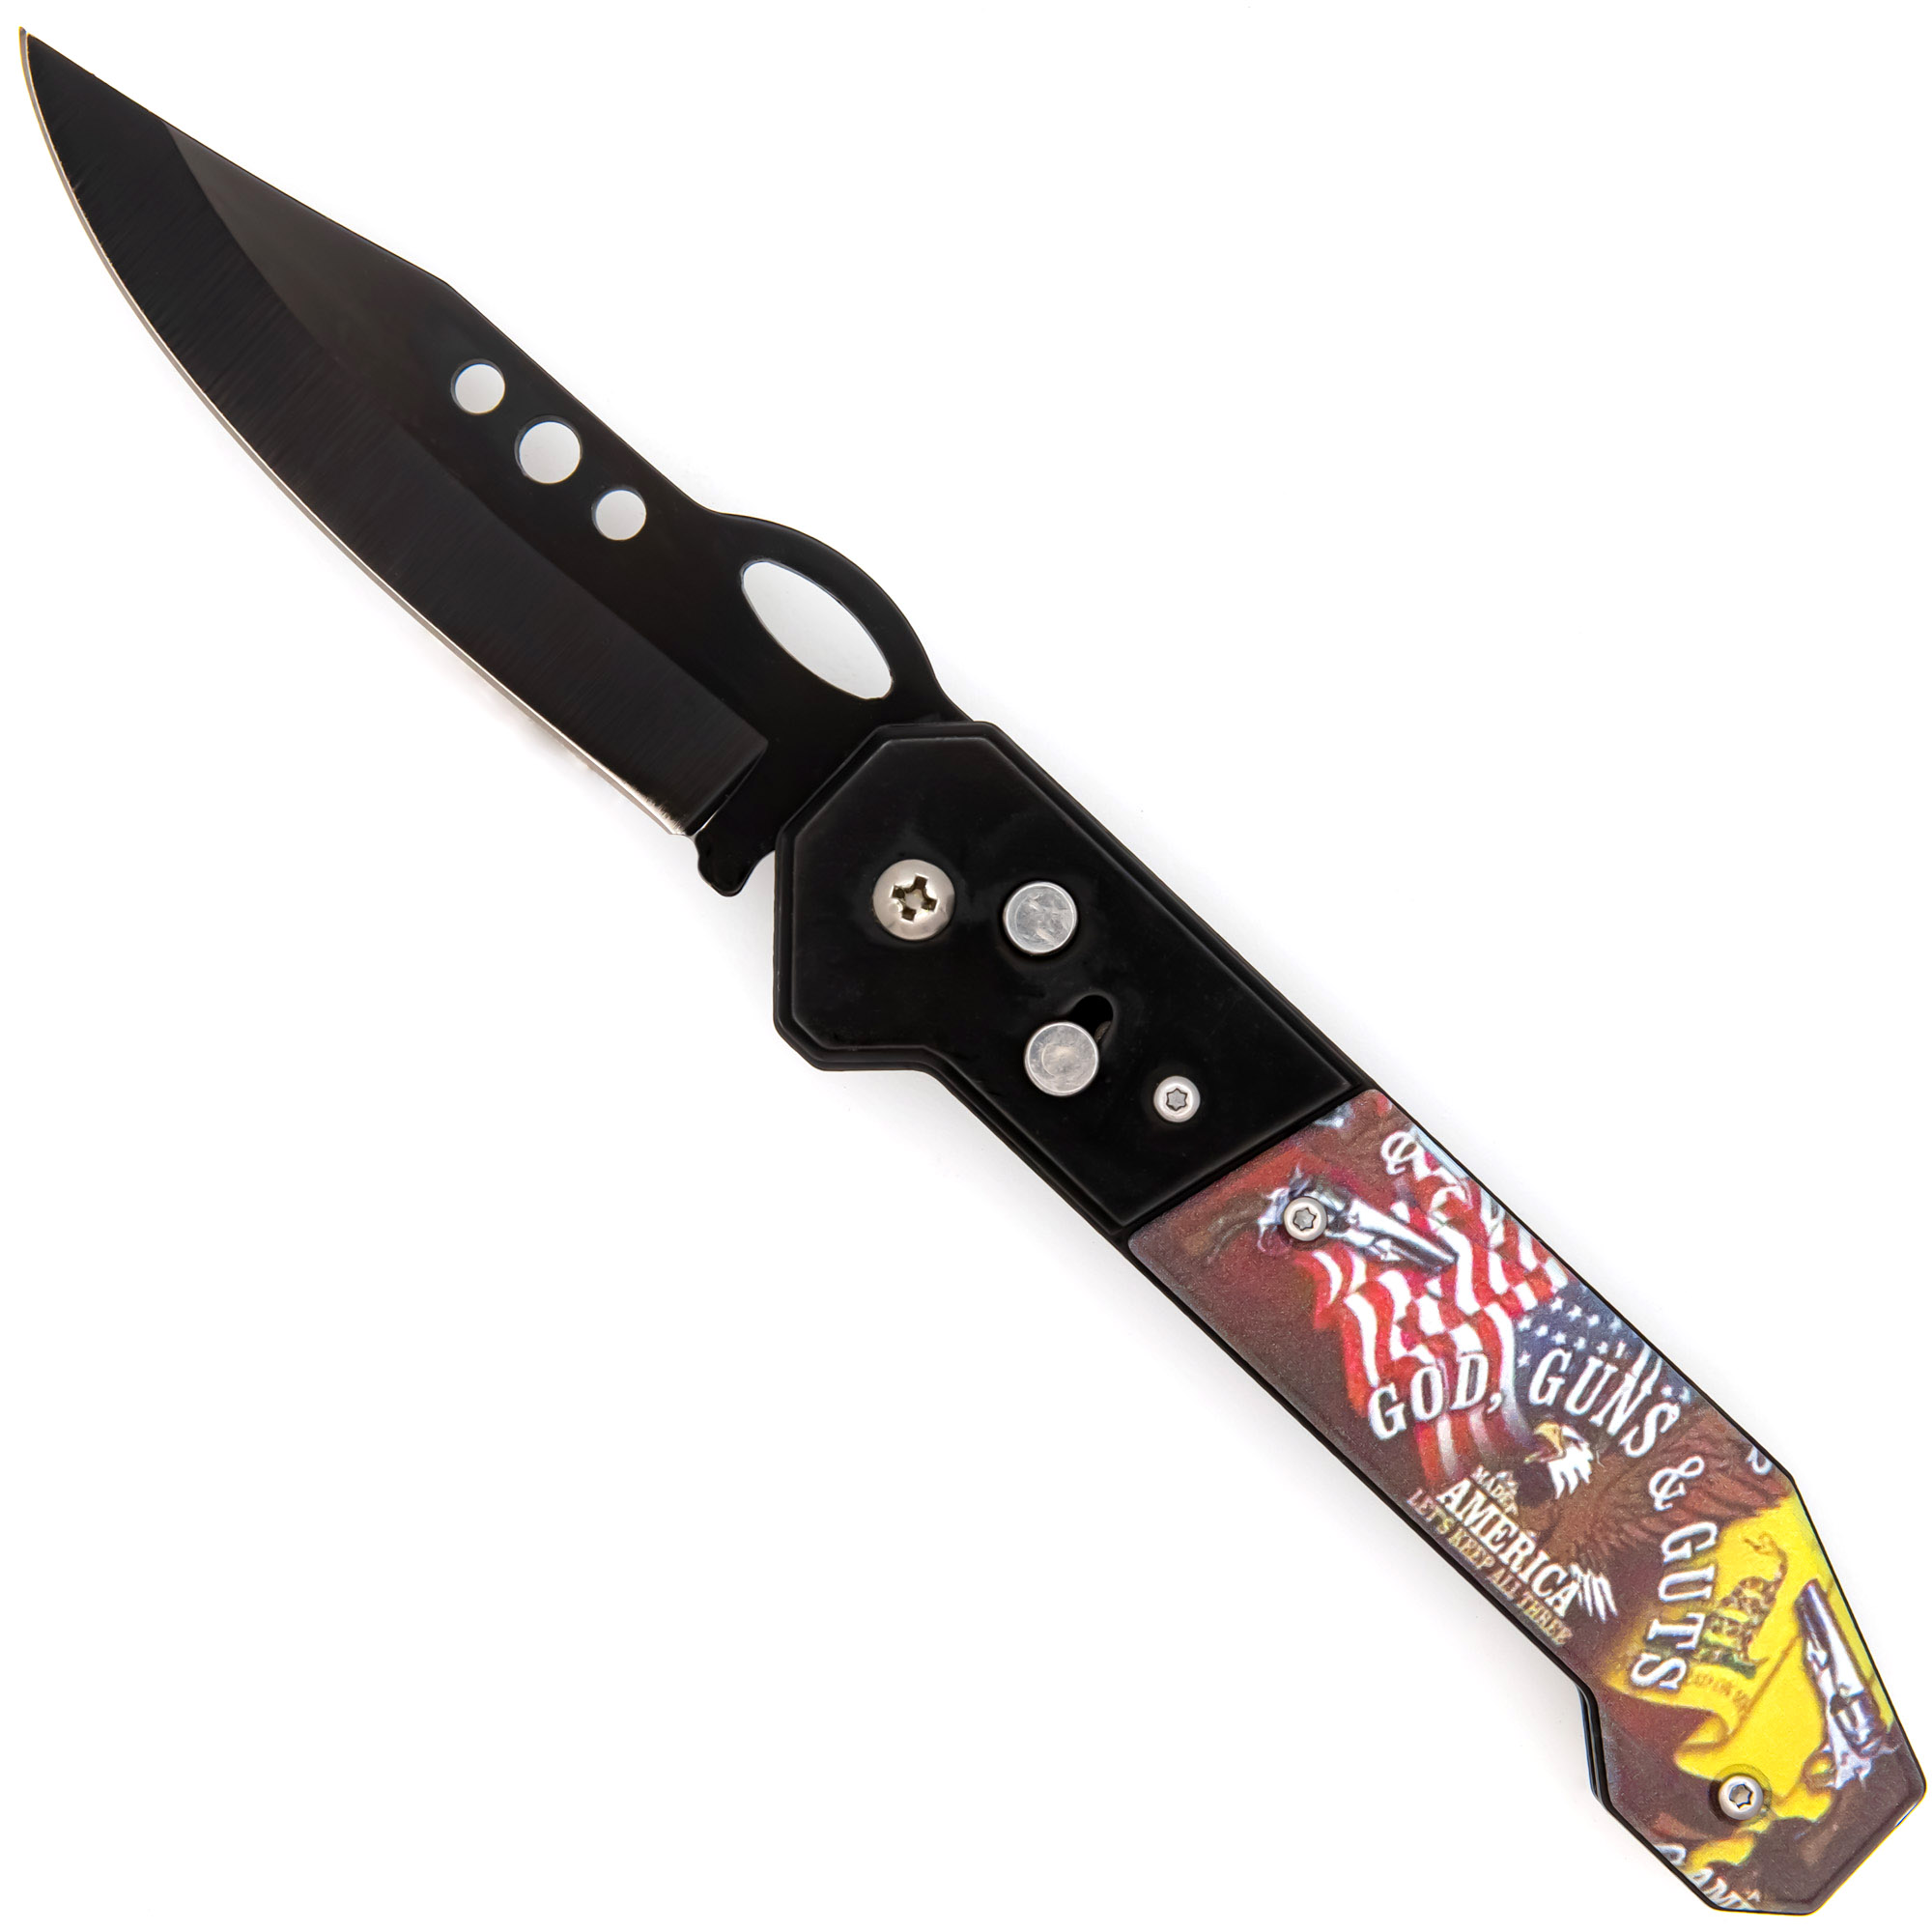 Code of Arms Automatic Push Button SWITCHBLADE Pocket Knife | God Guns & Guts